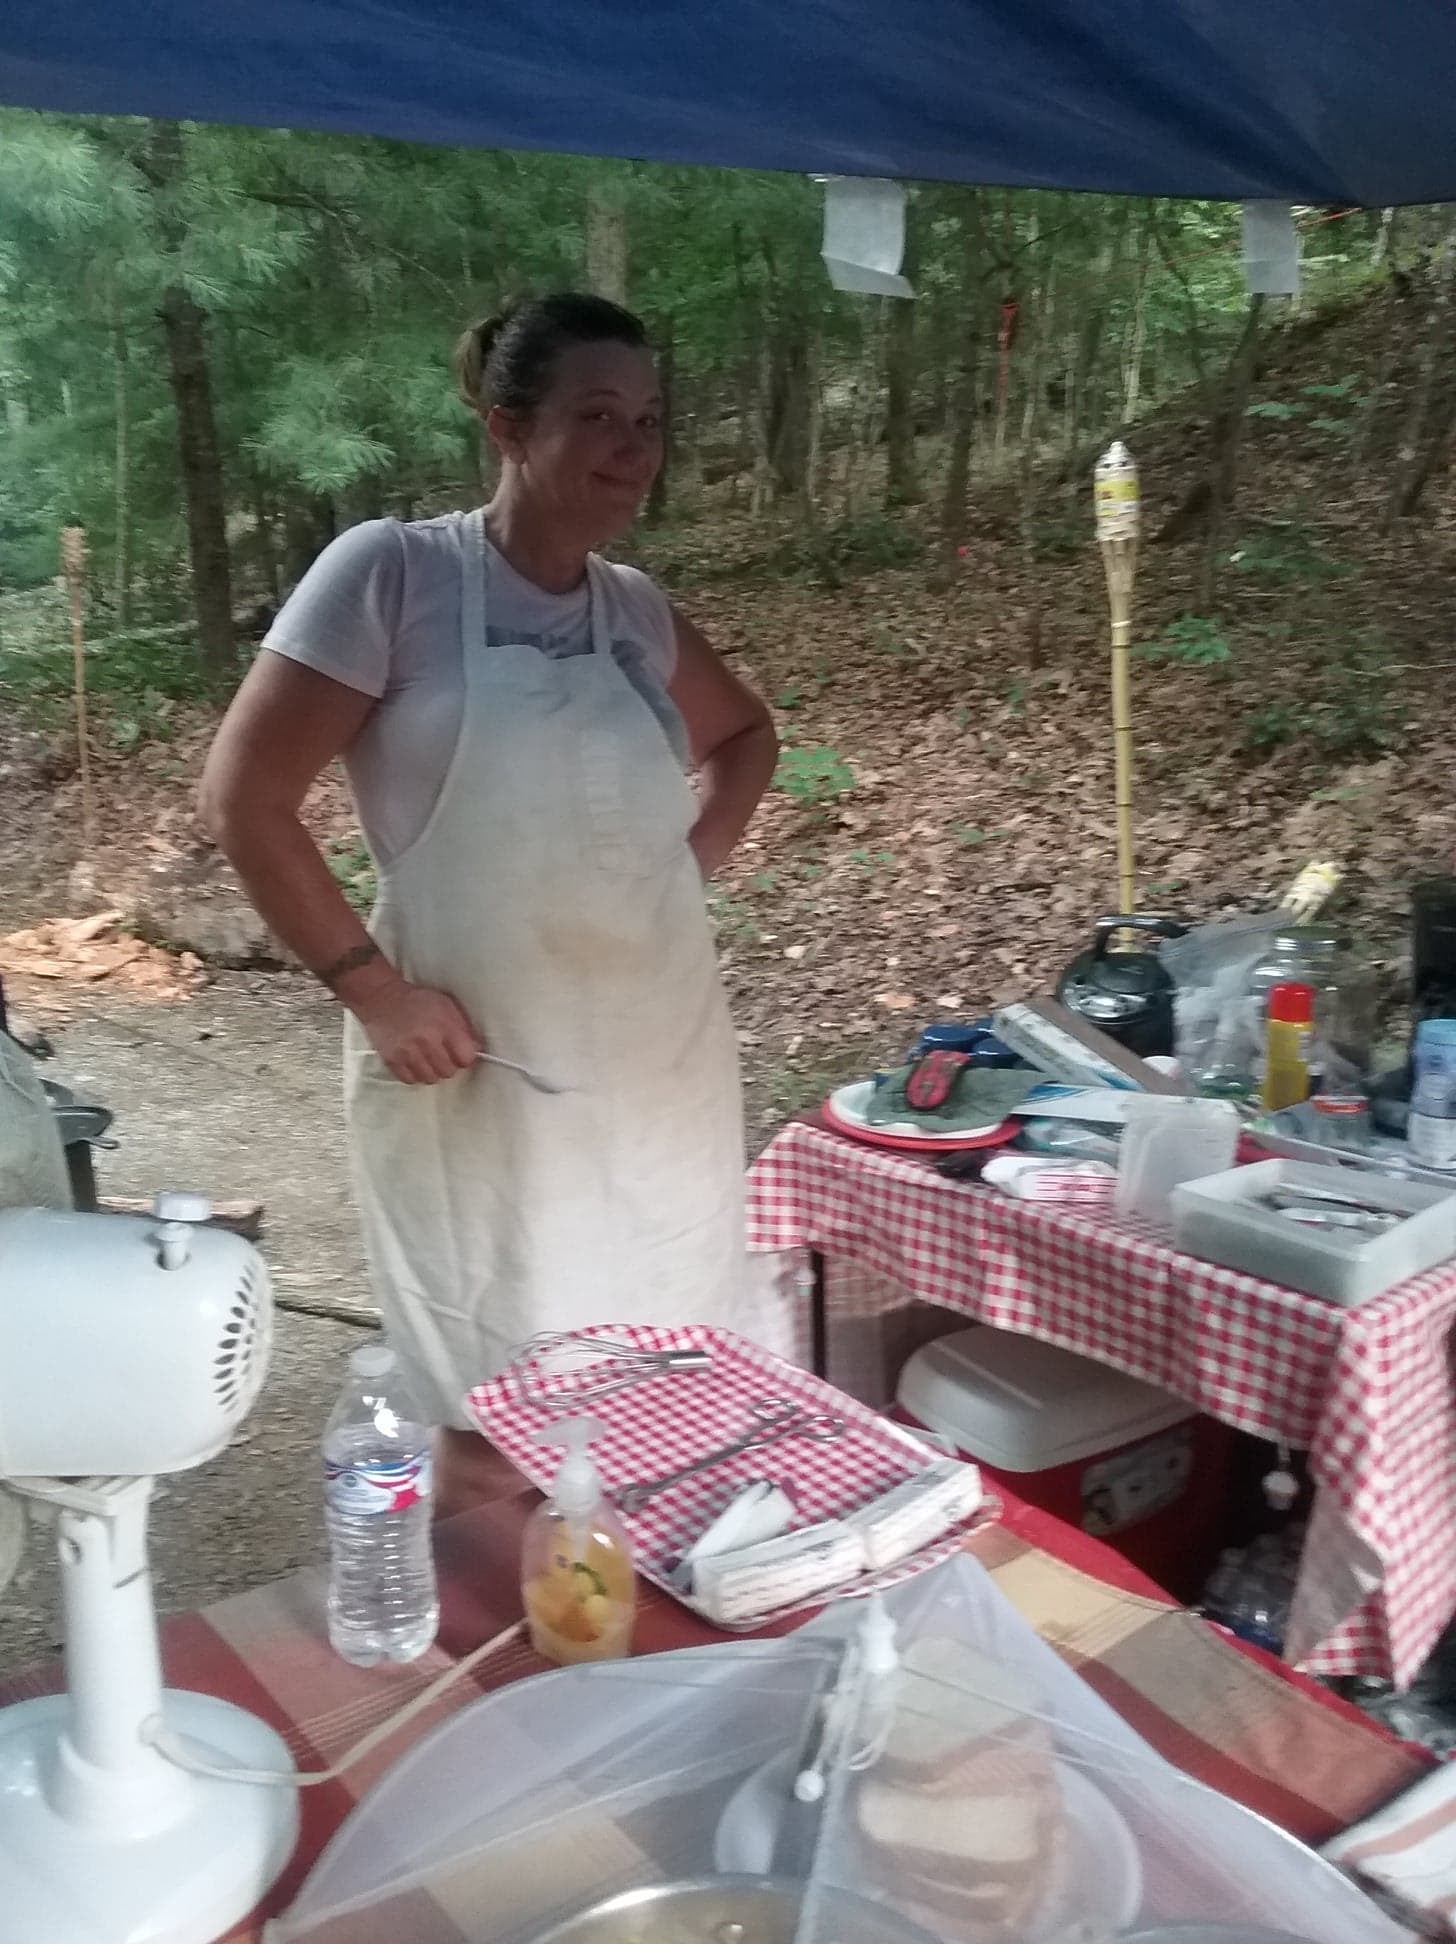 We love cooking all our meals breakfast lunch and dinner over an open flame. We always gain weight camping lol! 